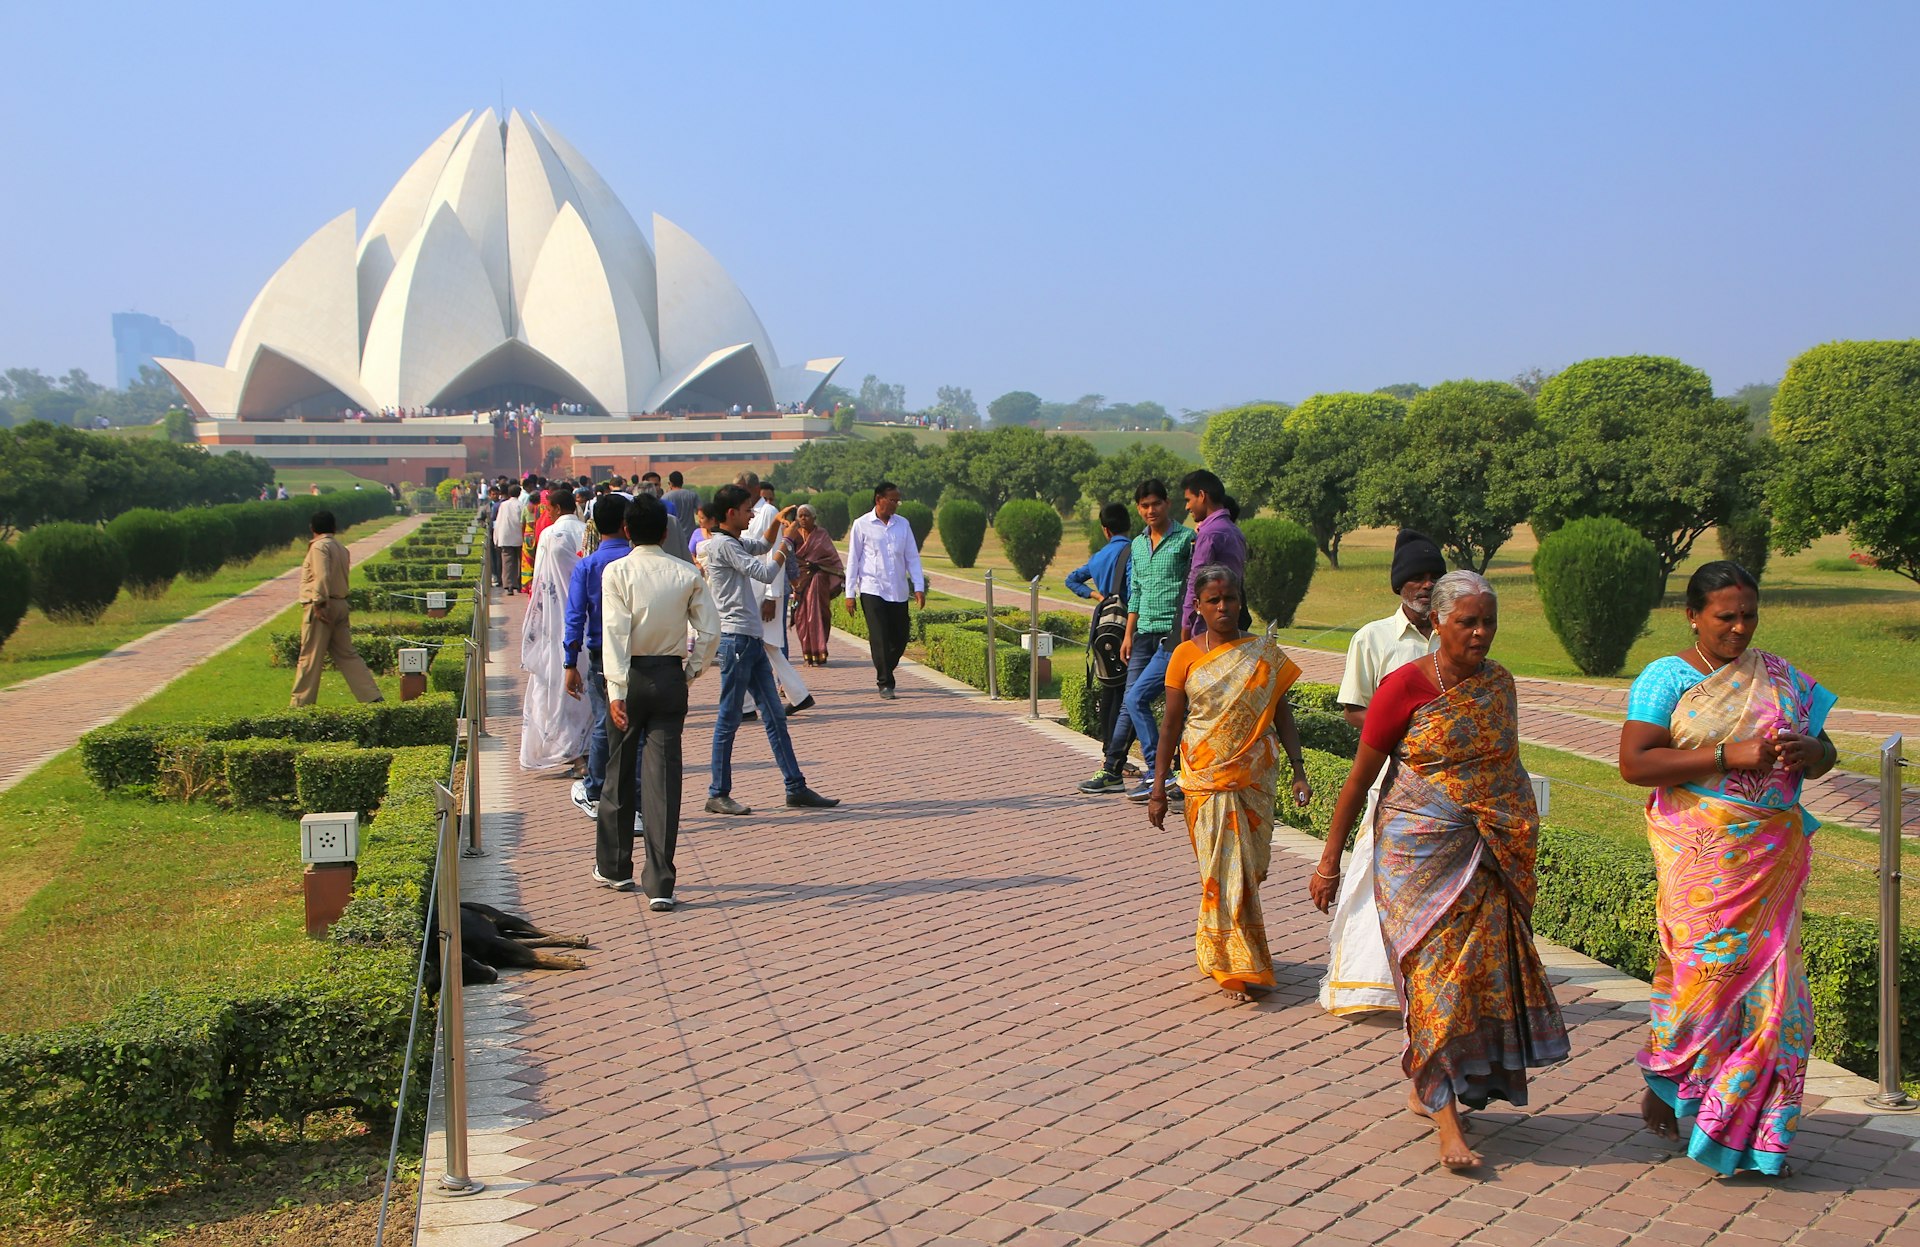 There's no mistaking the inspiration for Delhi's lotus flower-shaped Bahai House of Worship © Donyanedomam / Getty Images